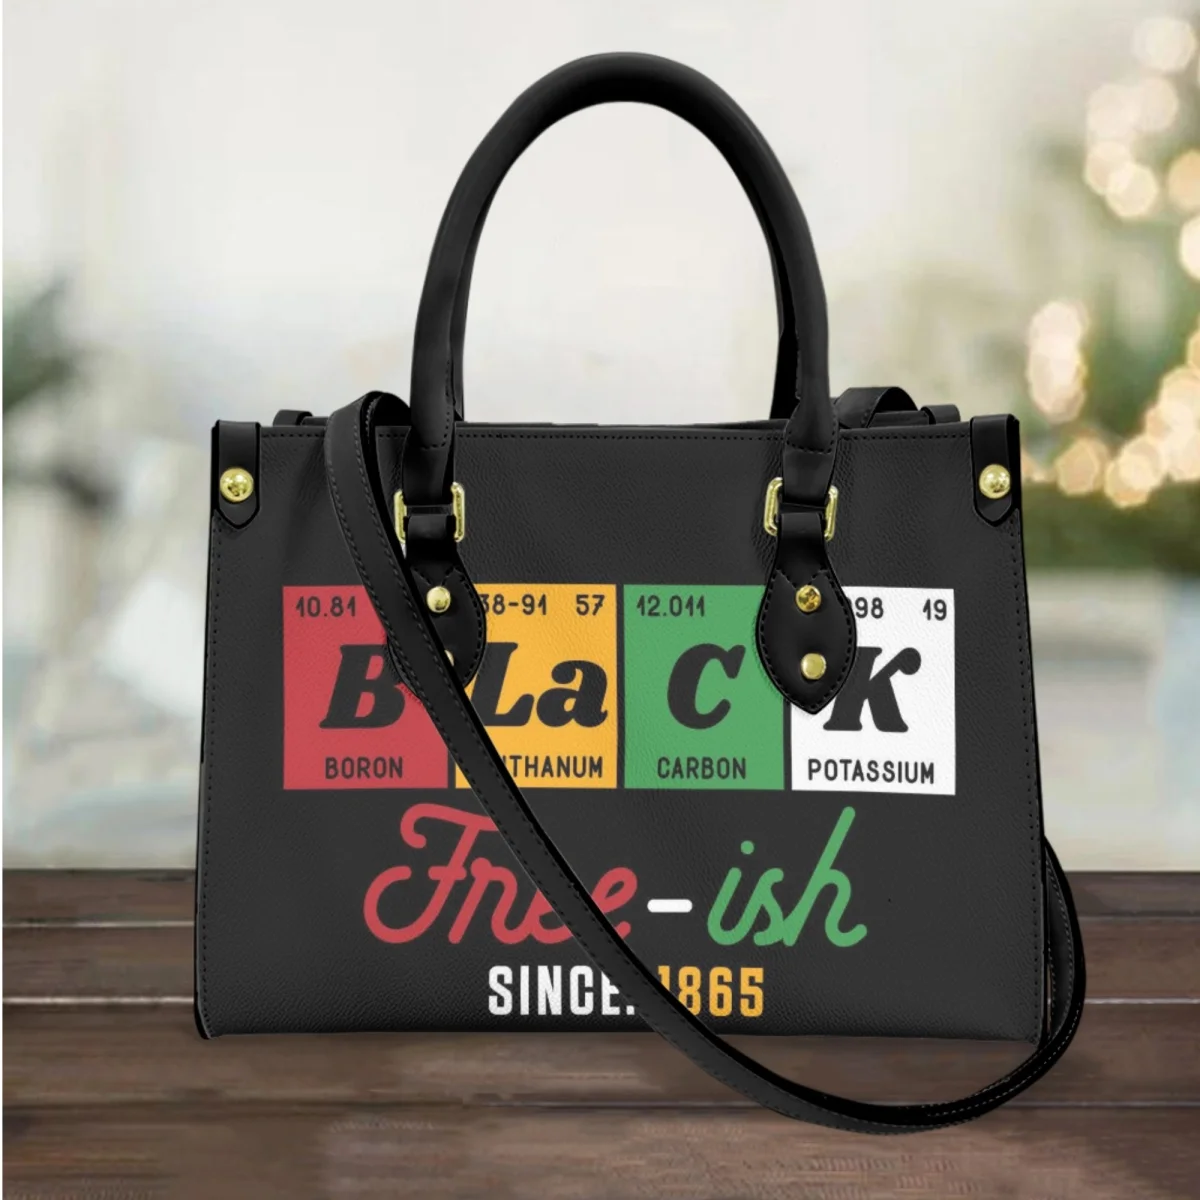 

Black History Month Juneteenth 1865 Print Totes High Quality Top Handle Travel Casual Small Handbags PU Leather Cross Body Bags